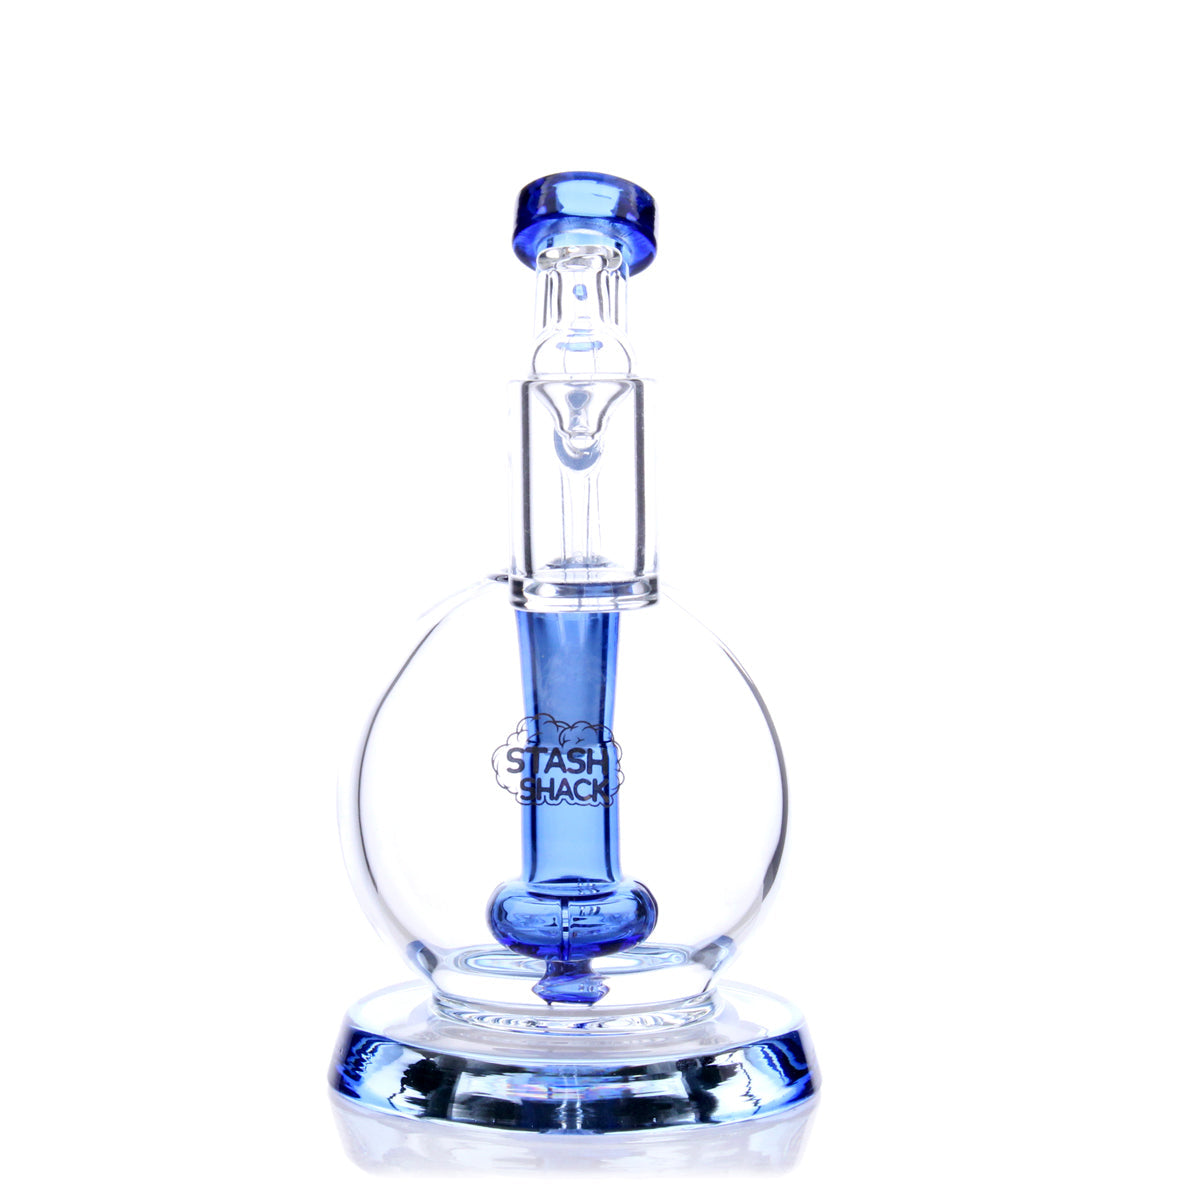 The Stash Shack TerpGlobe Mini Rig in Blue - Front View with Showerhead Percolator